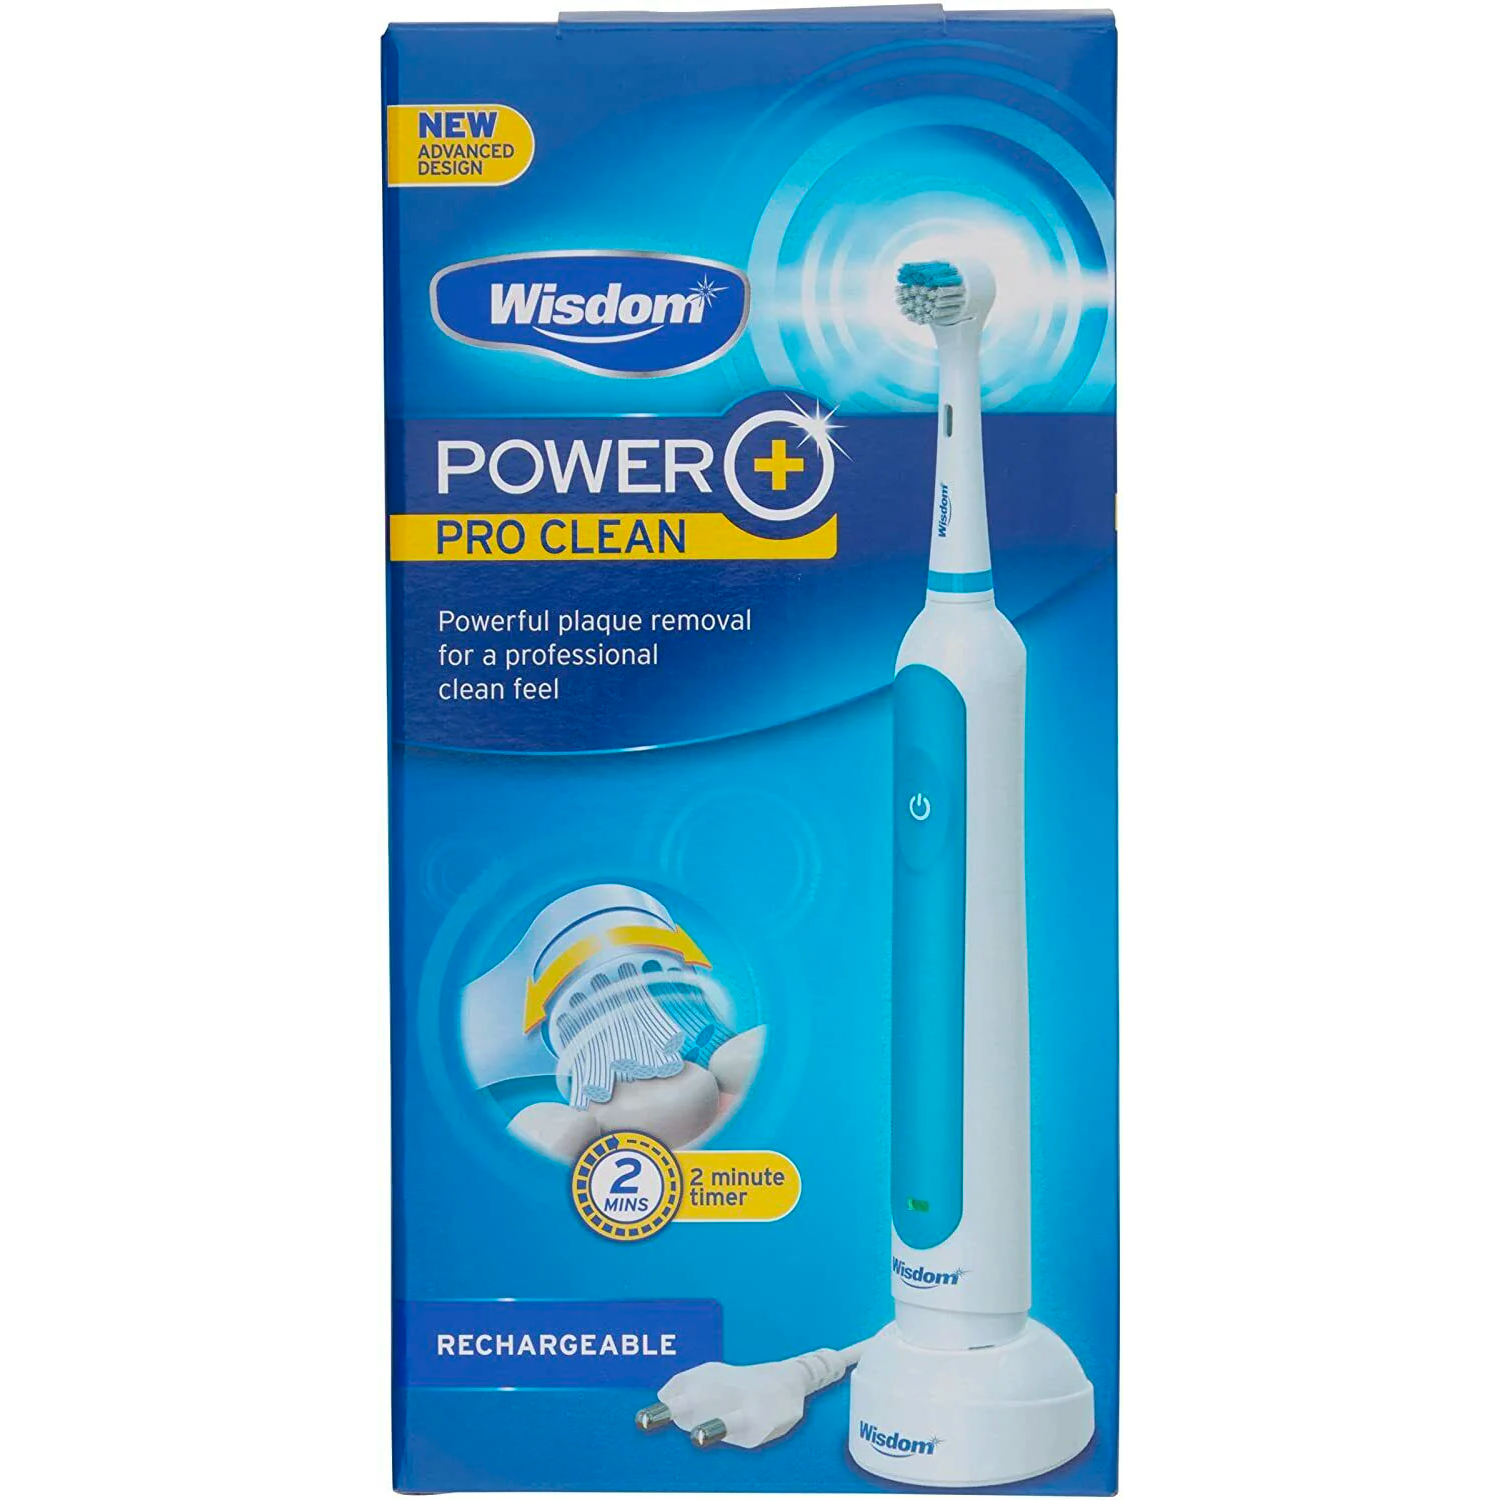 Wisdom Power+ Pro Clean Rechargeable Electric Toothbrush Brand New and Authentic